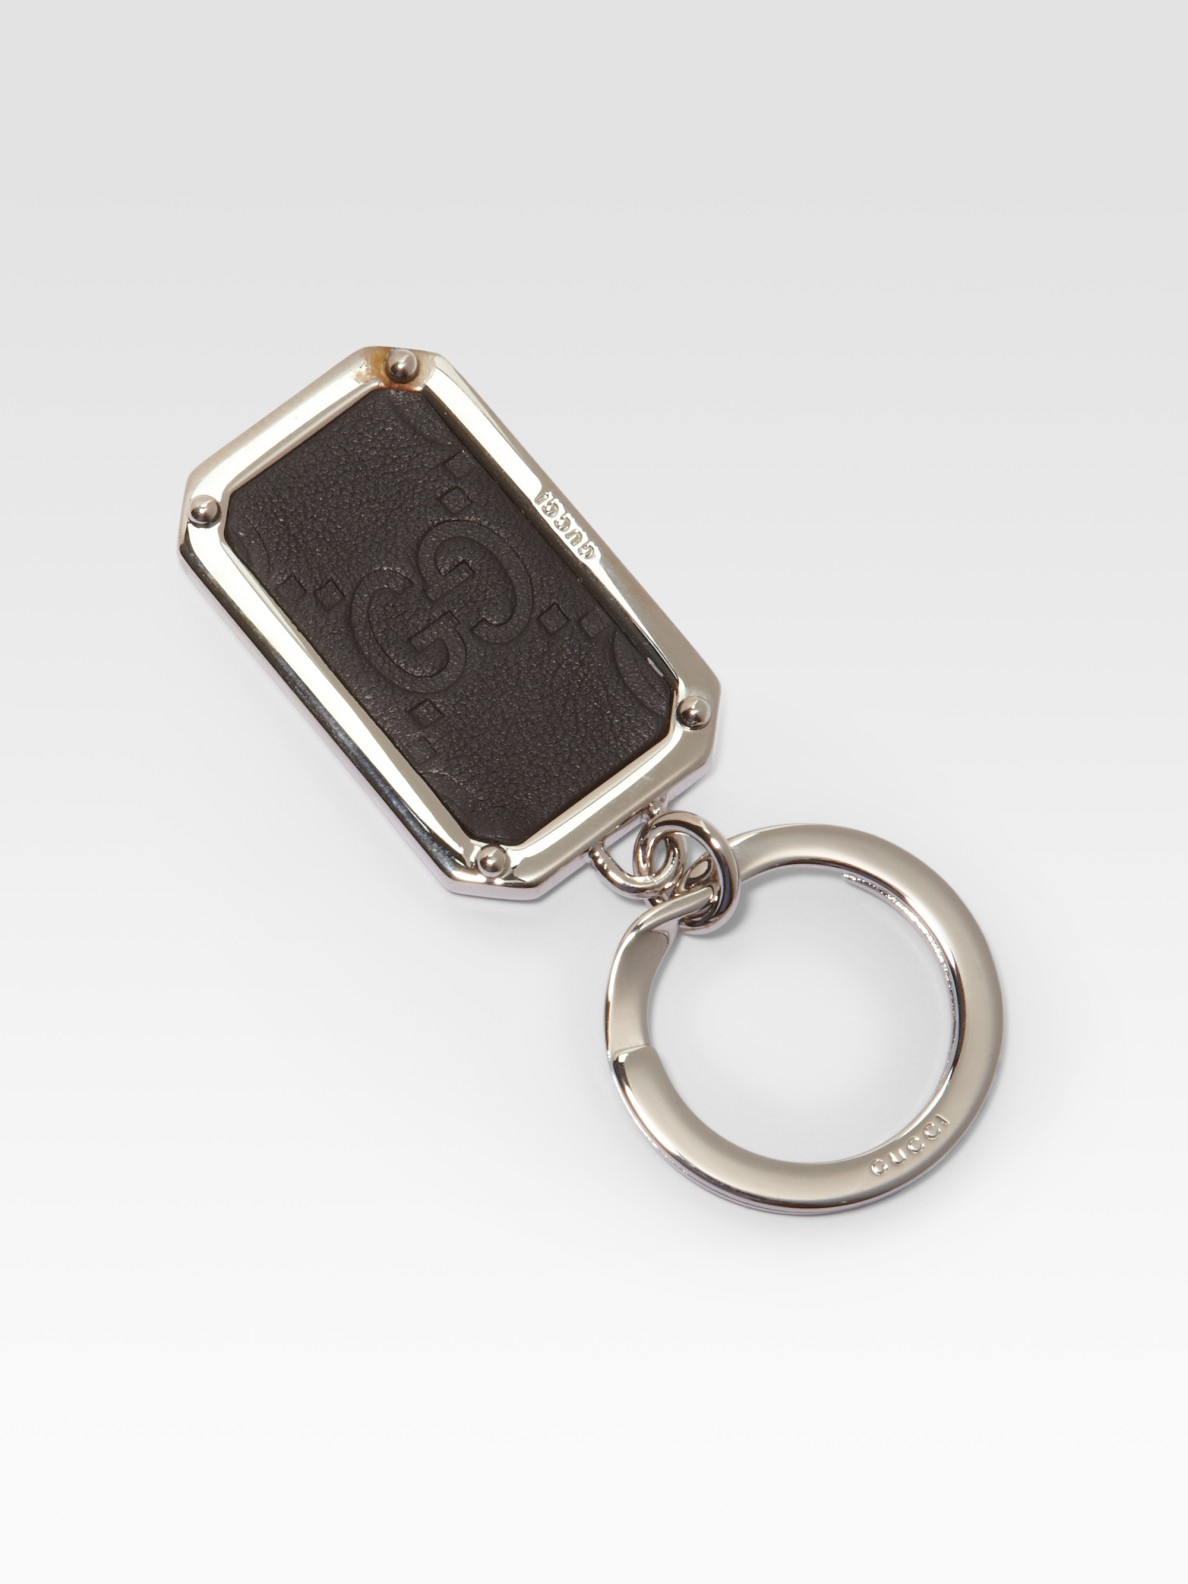 Lyst - Gucci Guccissima Leather Key Ring in Black for Men